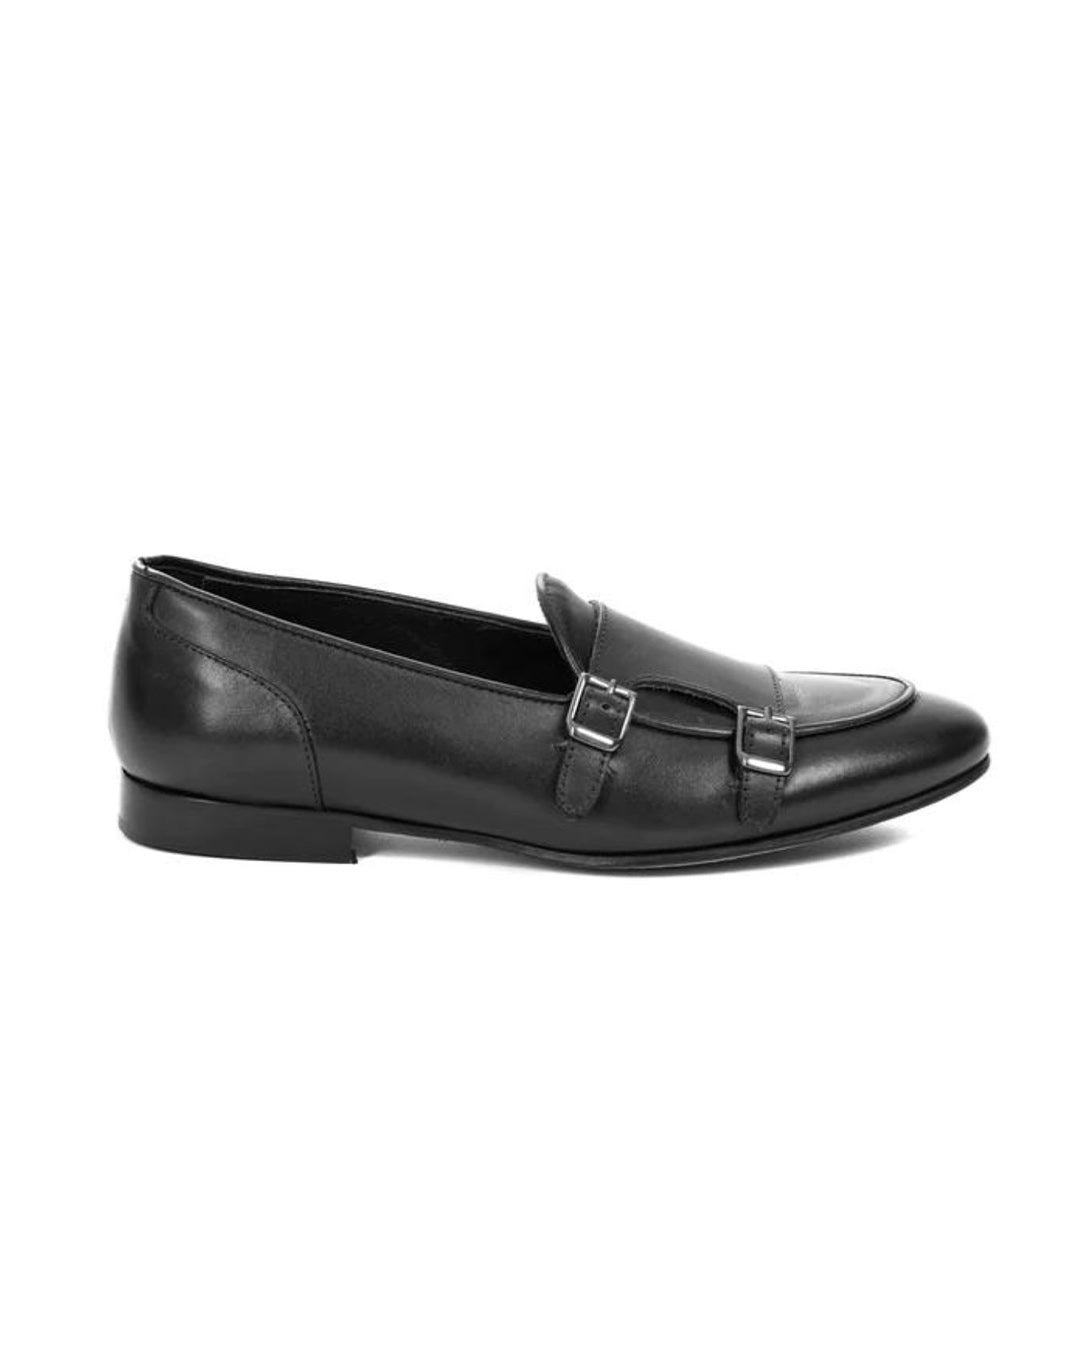 Gianni - black moccasin with double buckle